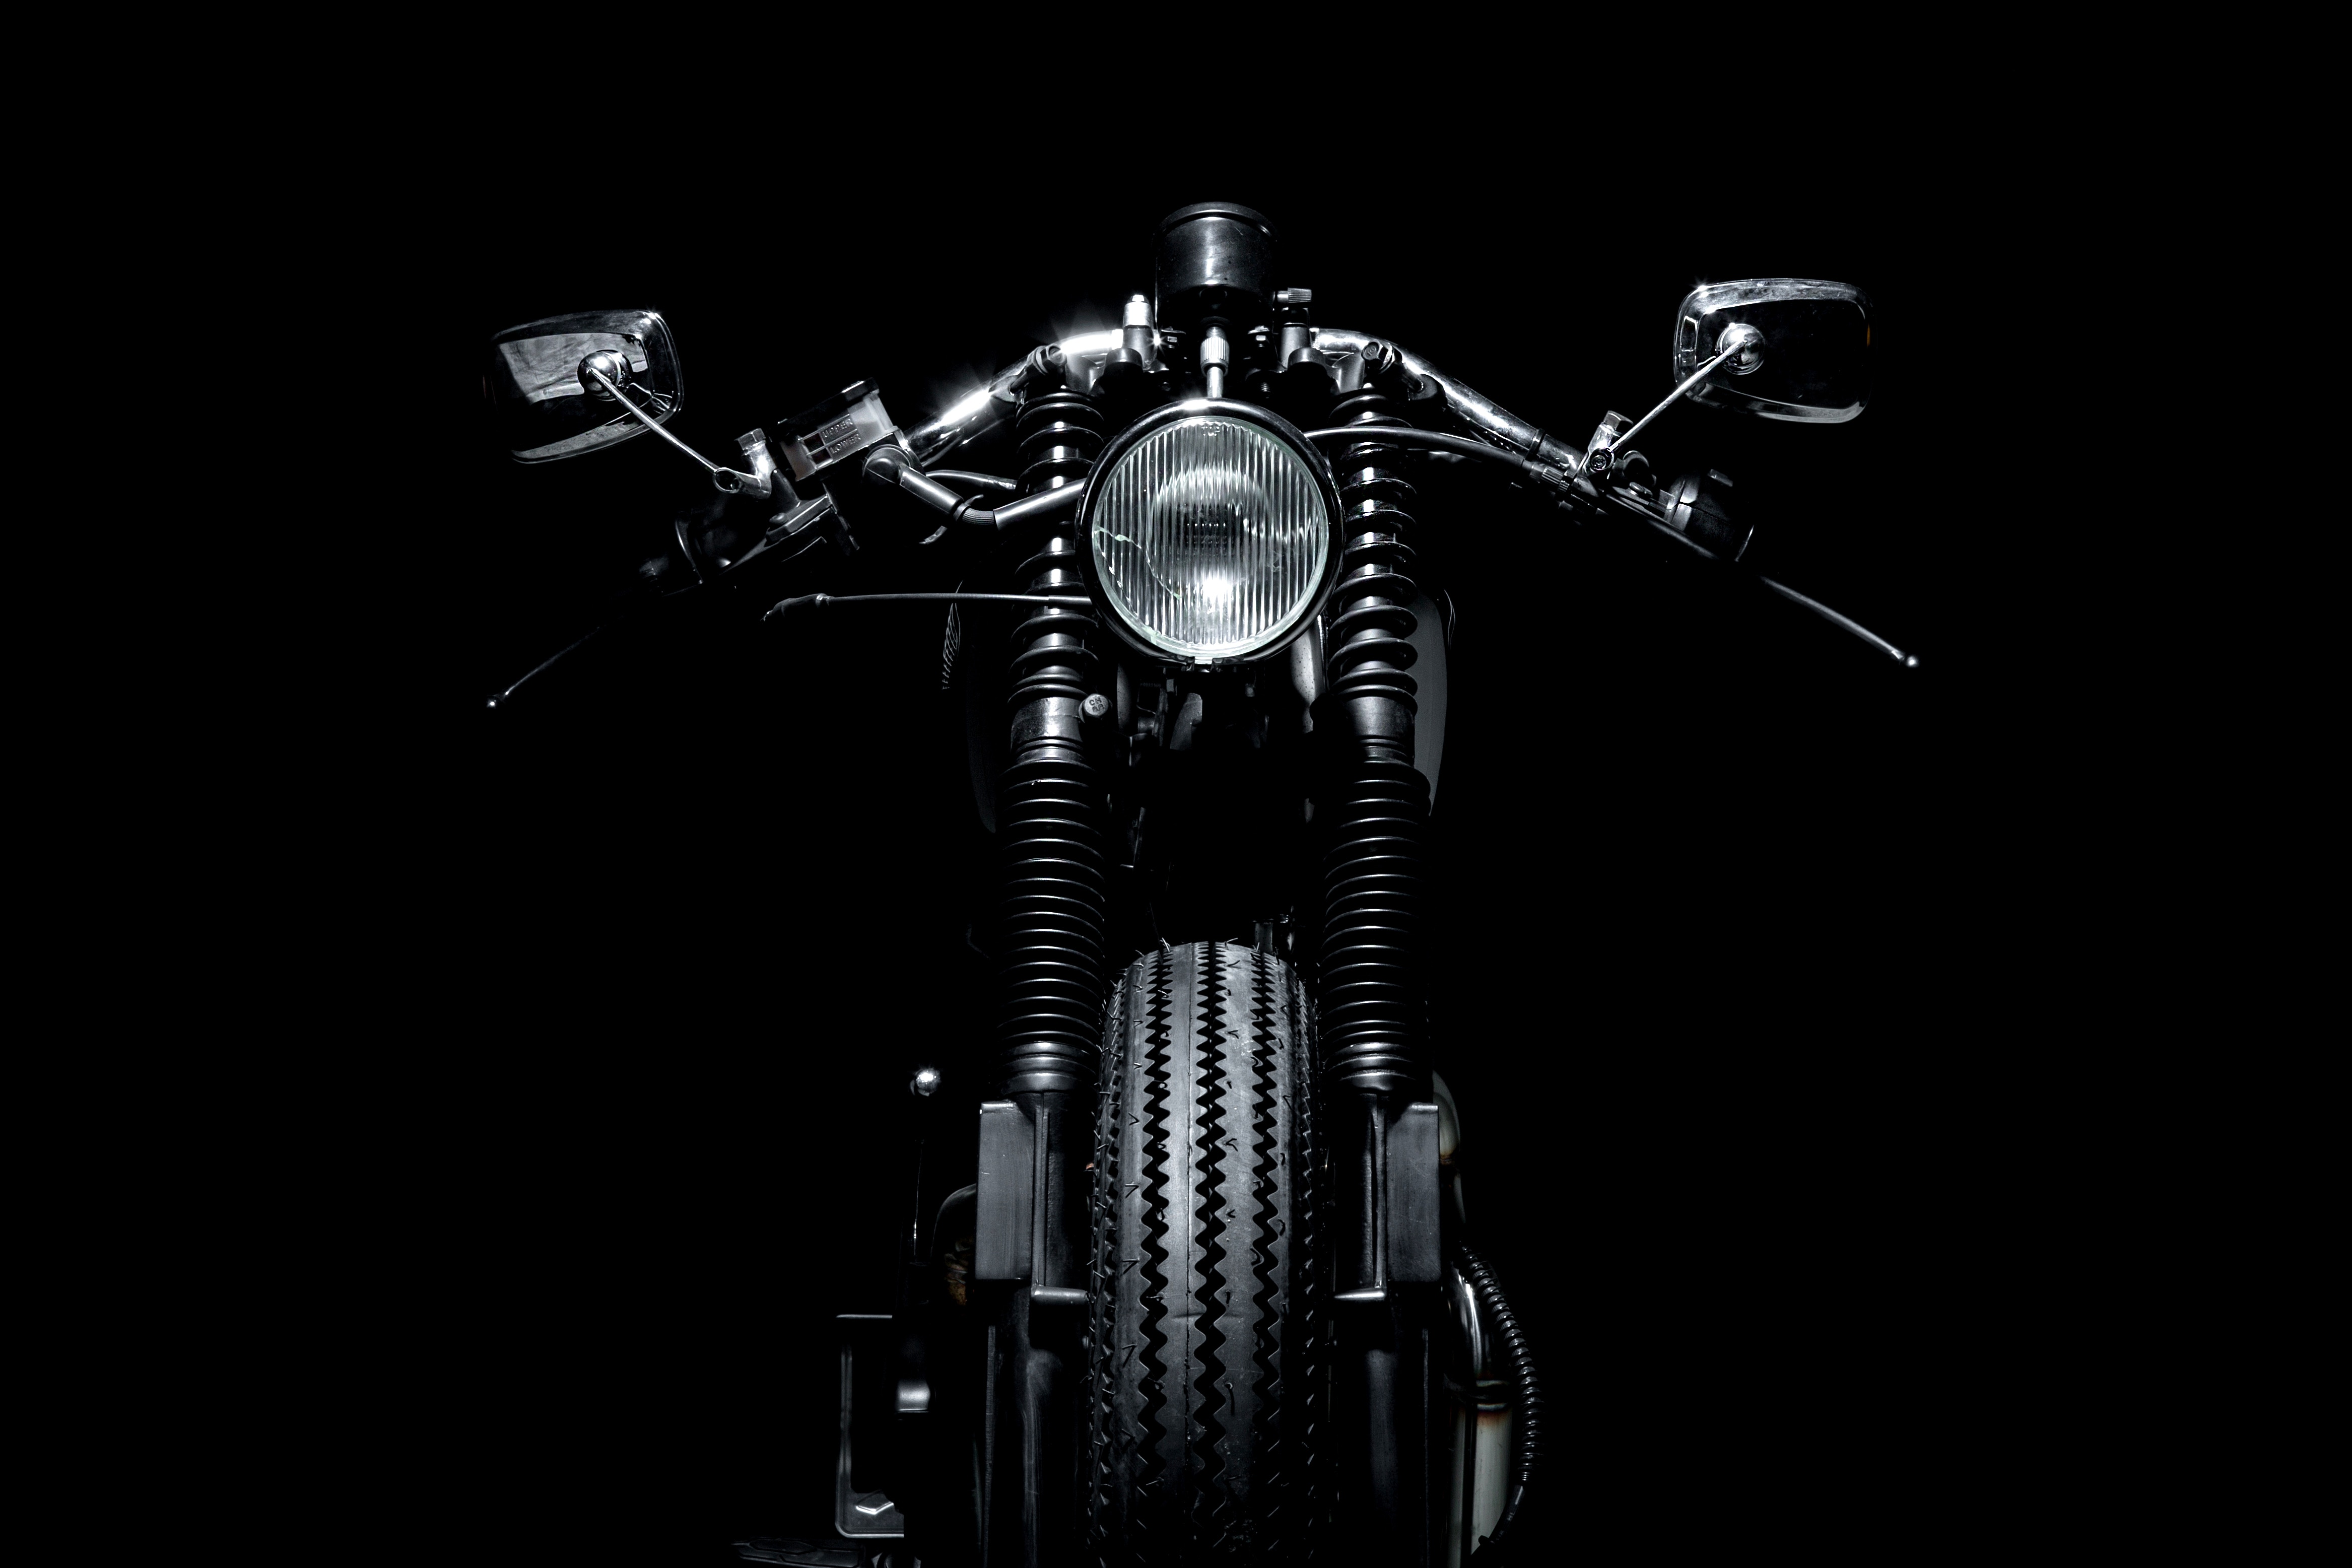 chb, motorcycles, bw, motorcycle, headlight, tire, tyre